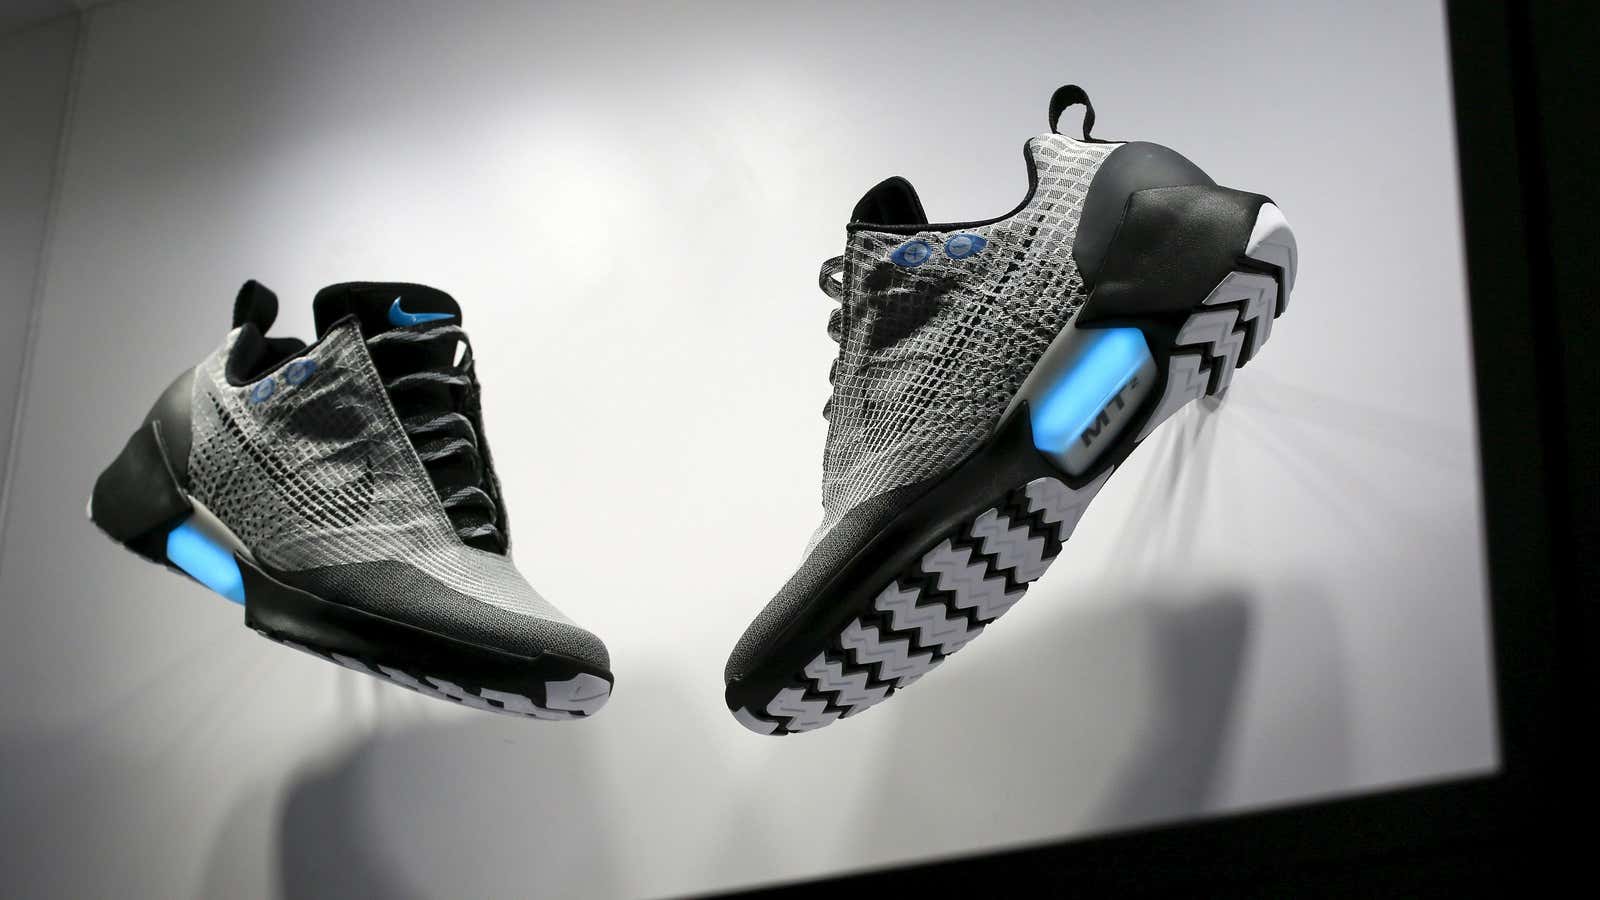 Amazon leapt over Nike for millennial shoe shoppers.